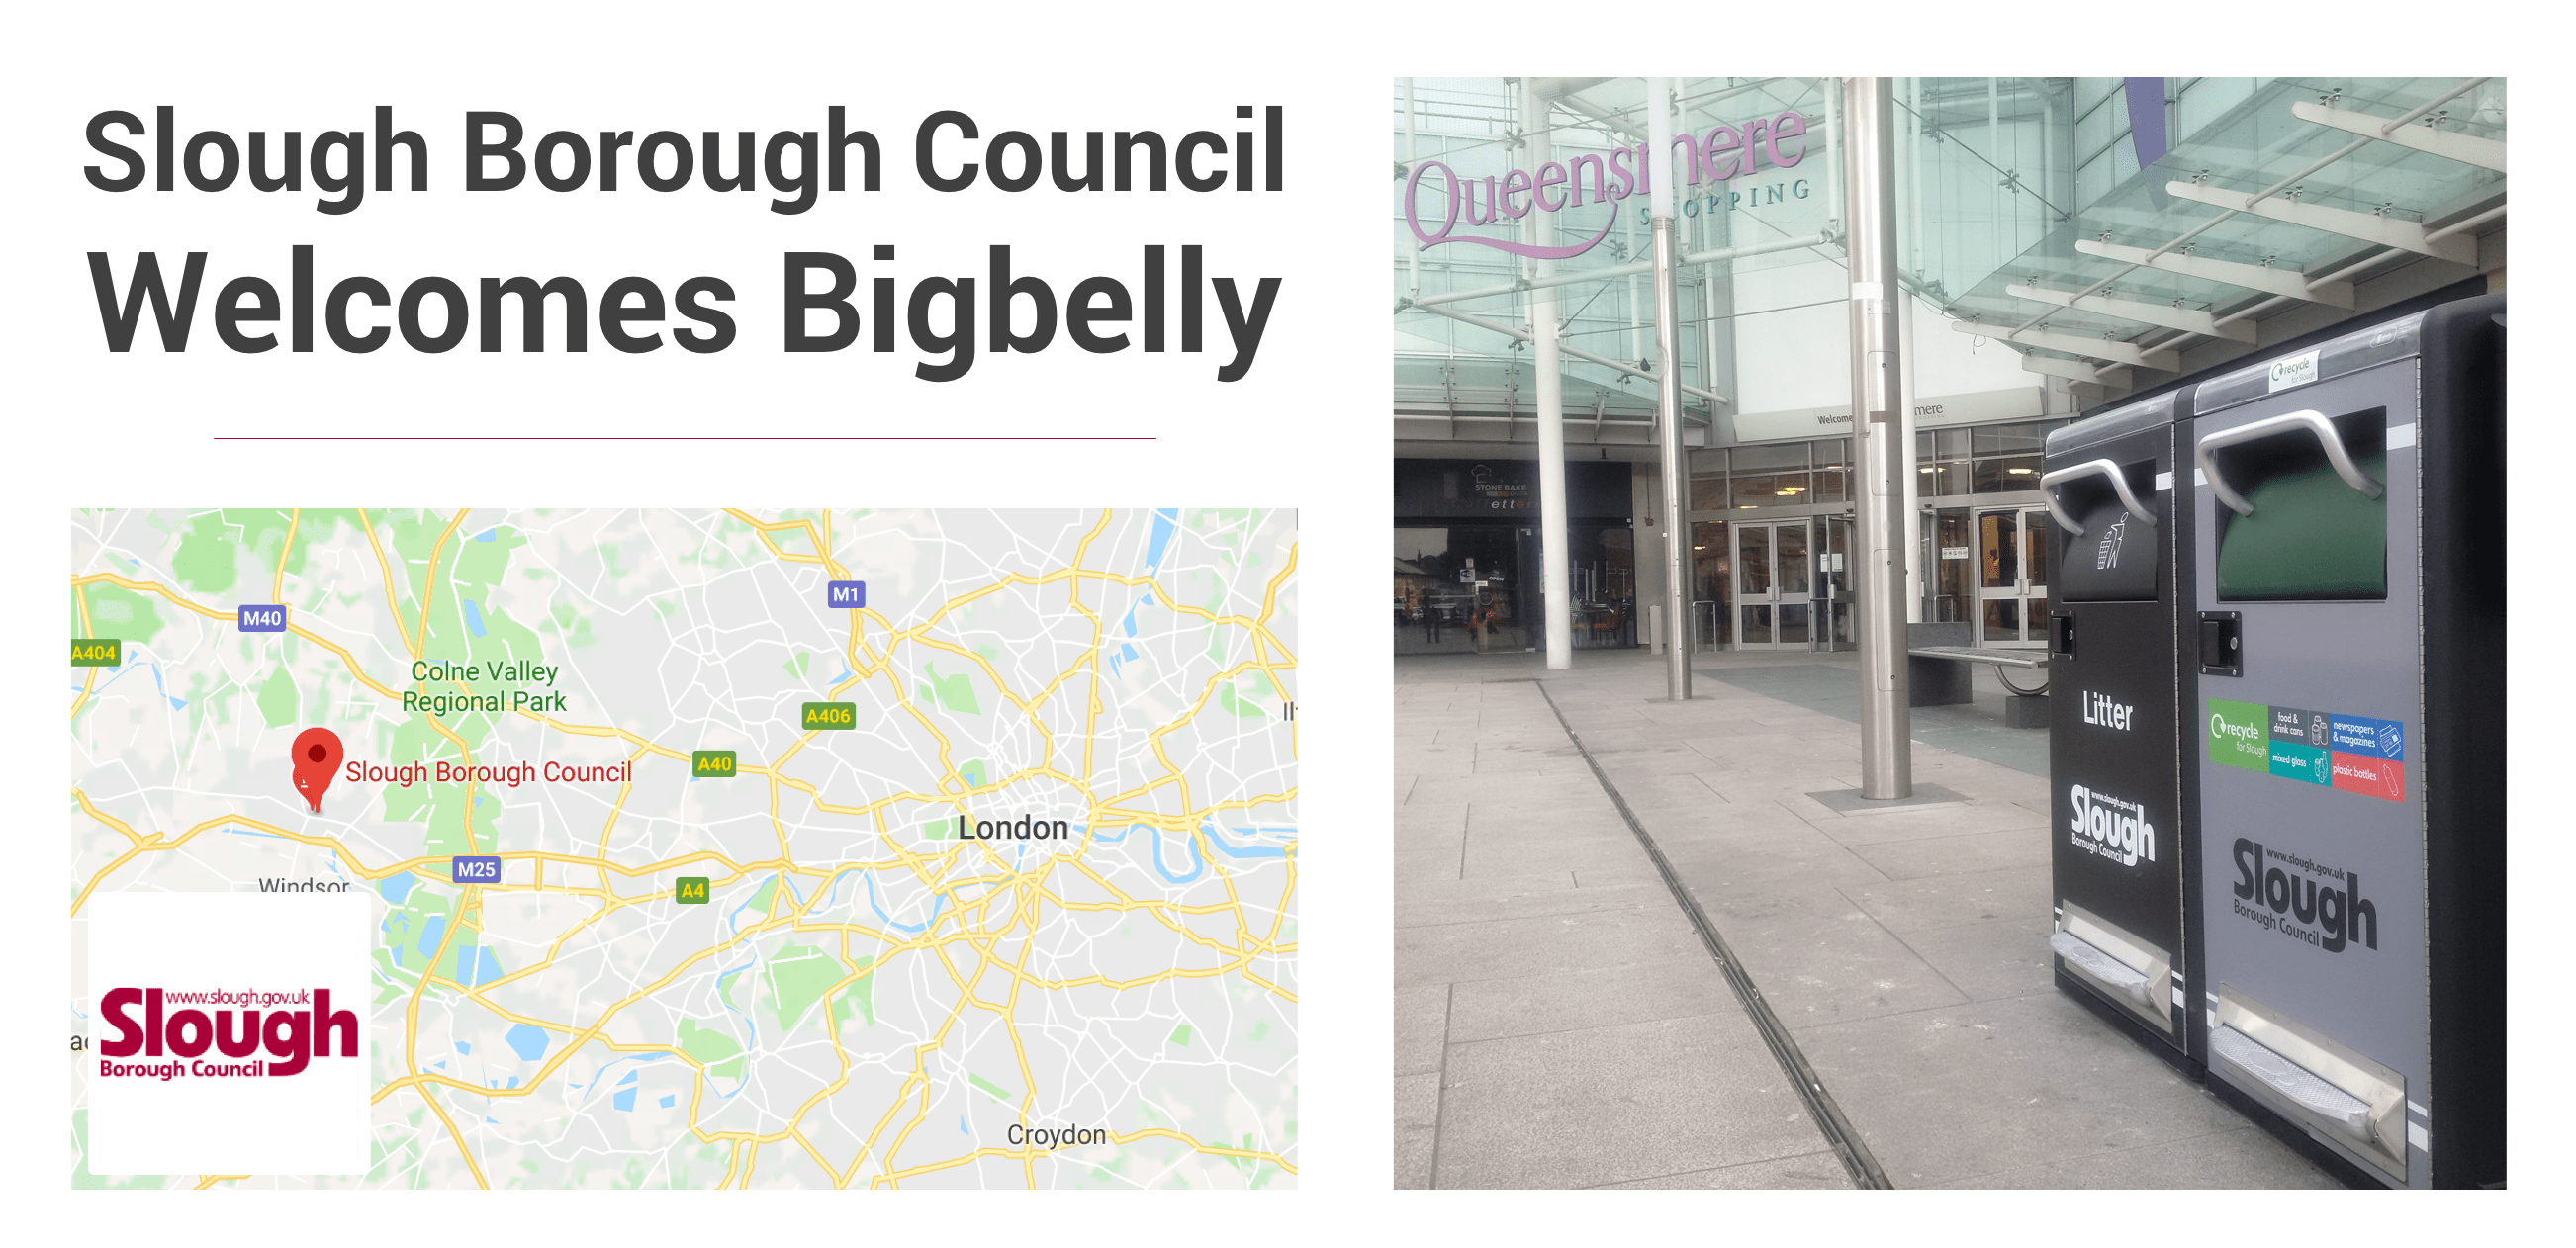 SloughBoroughCouncilBigbelly.png